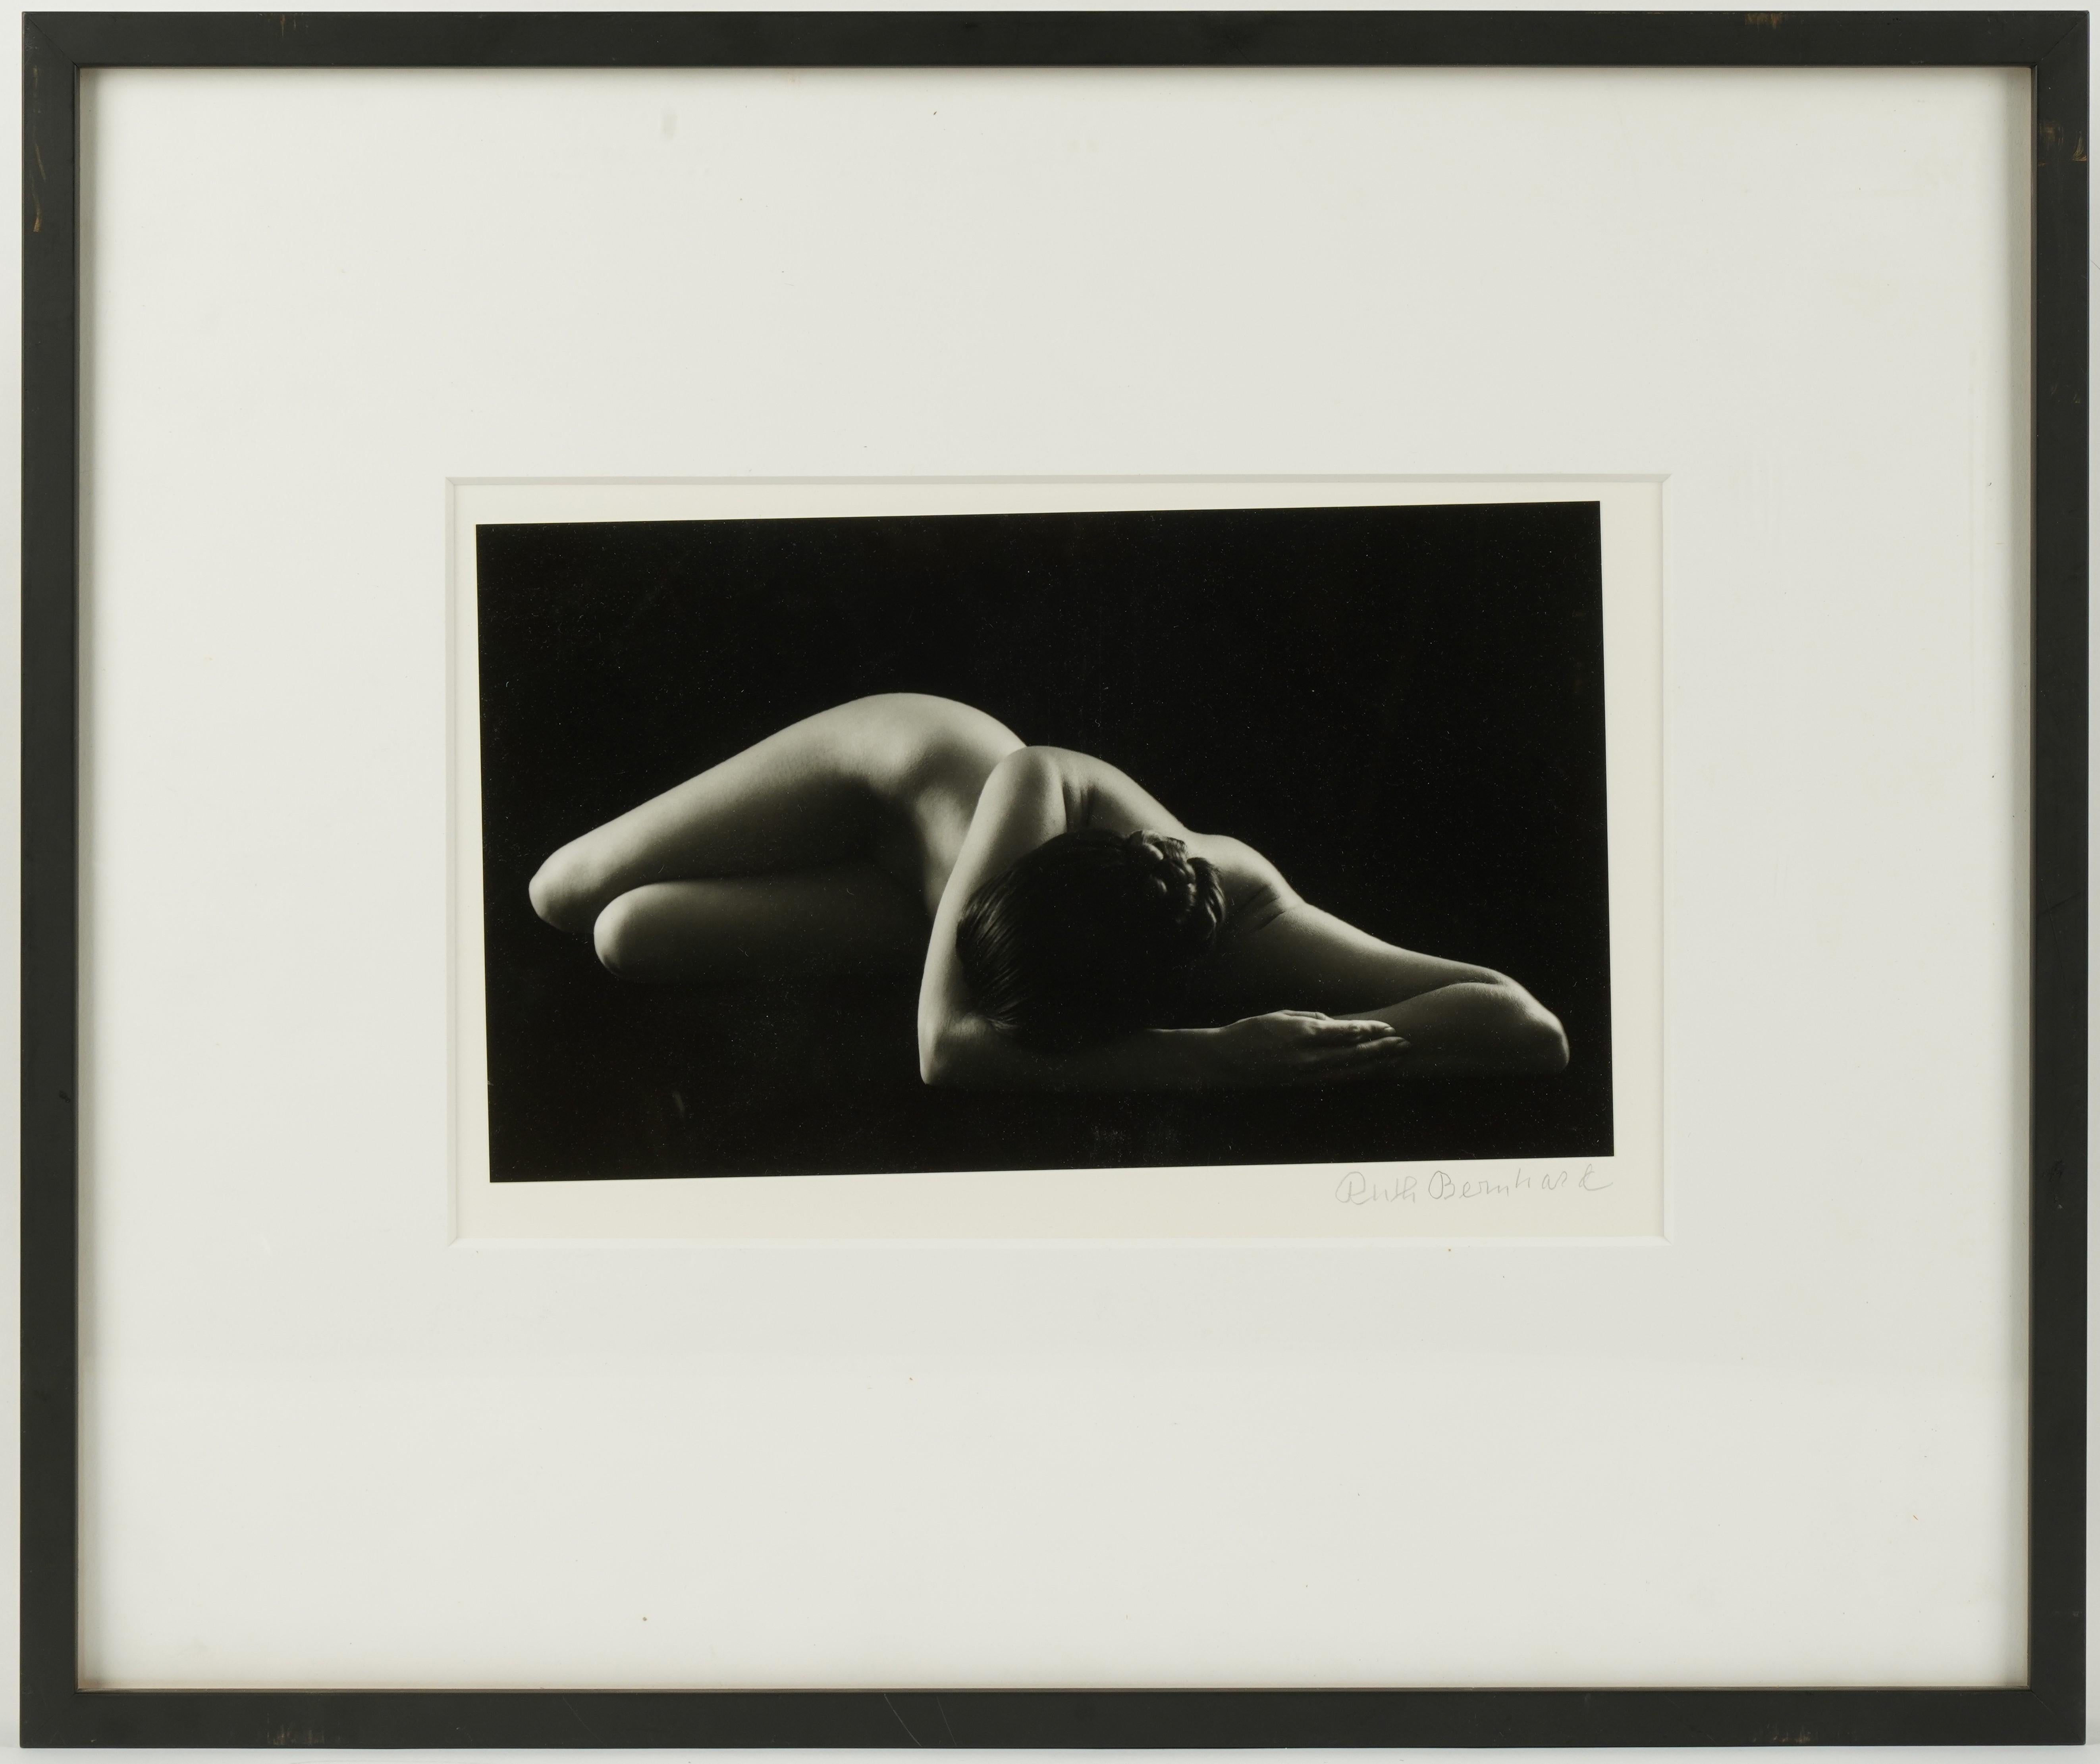 A beautiful and timeless image/photographic print by famed German-American photographer/artist Ruth Bernhard (1905-2006). This classic feminine nude study is titled 